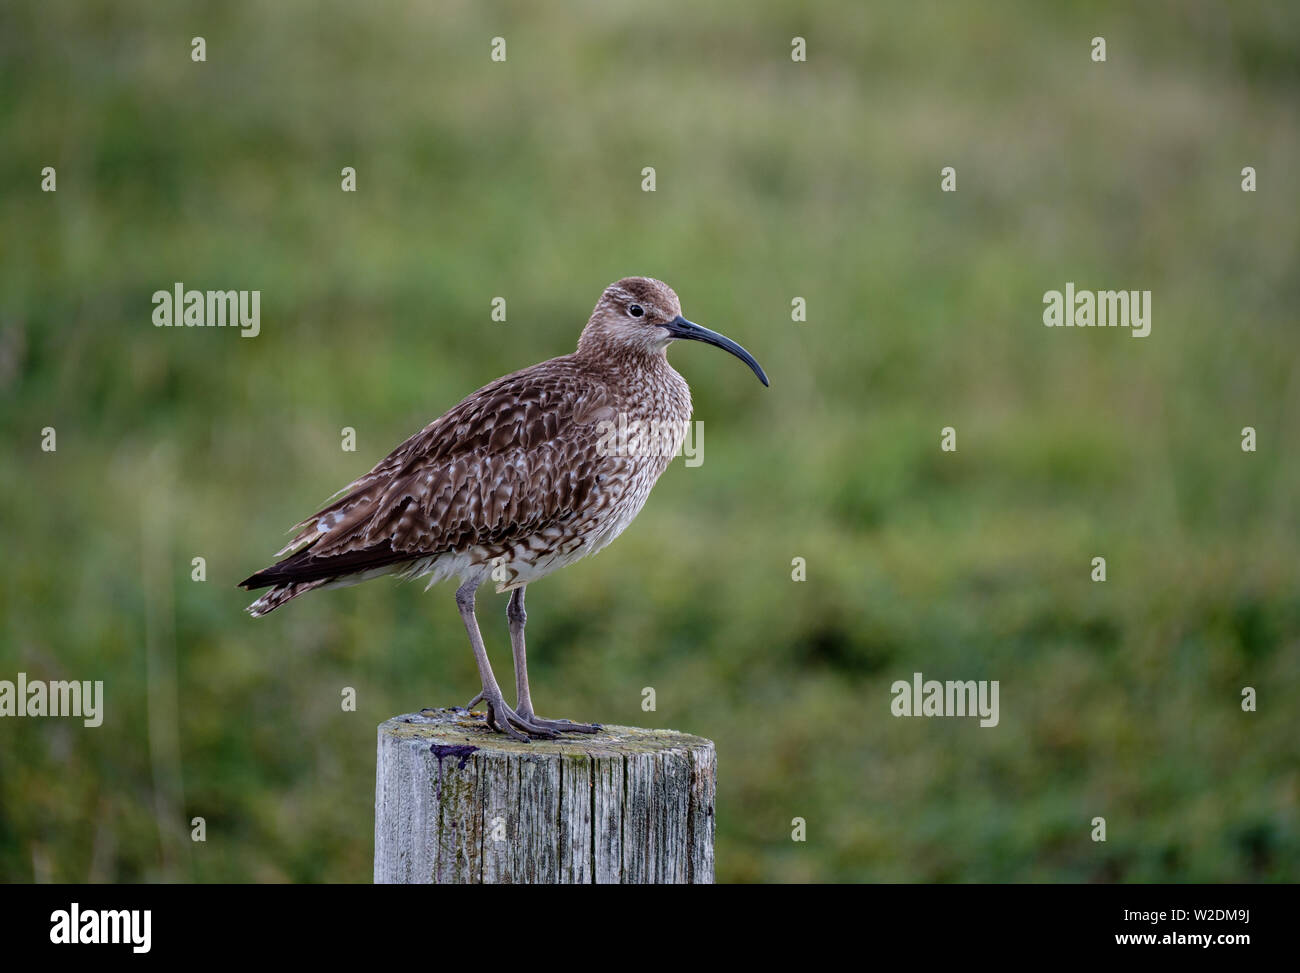 Whimbrel Numenius phaeopus standing on a fence pole with green background, Iceland Stock Photo